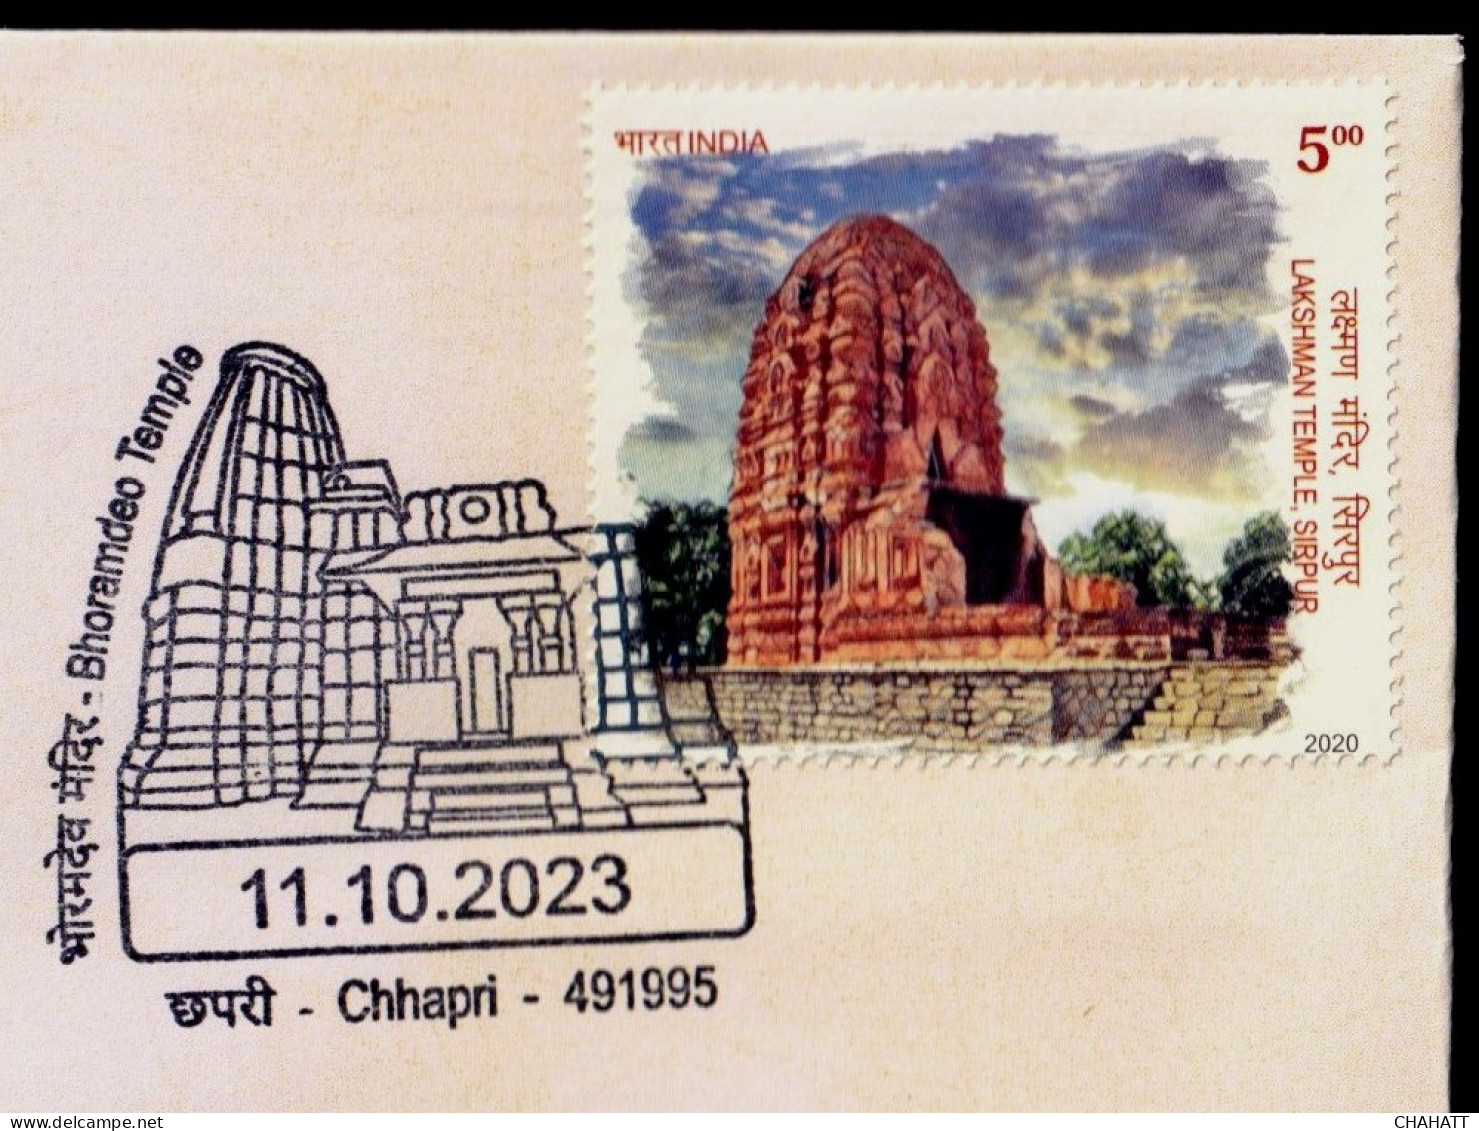 HINDUISM- BHORAMDEO TEMPLE- PERMANENT CACHET- INDIA POST, RAIPUR GPO-CG CIRCLE-LIMITED ISSUE-BX4-29 - Hinduism